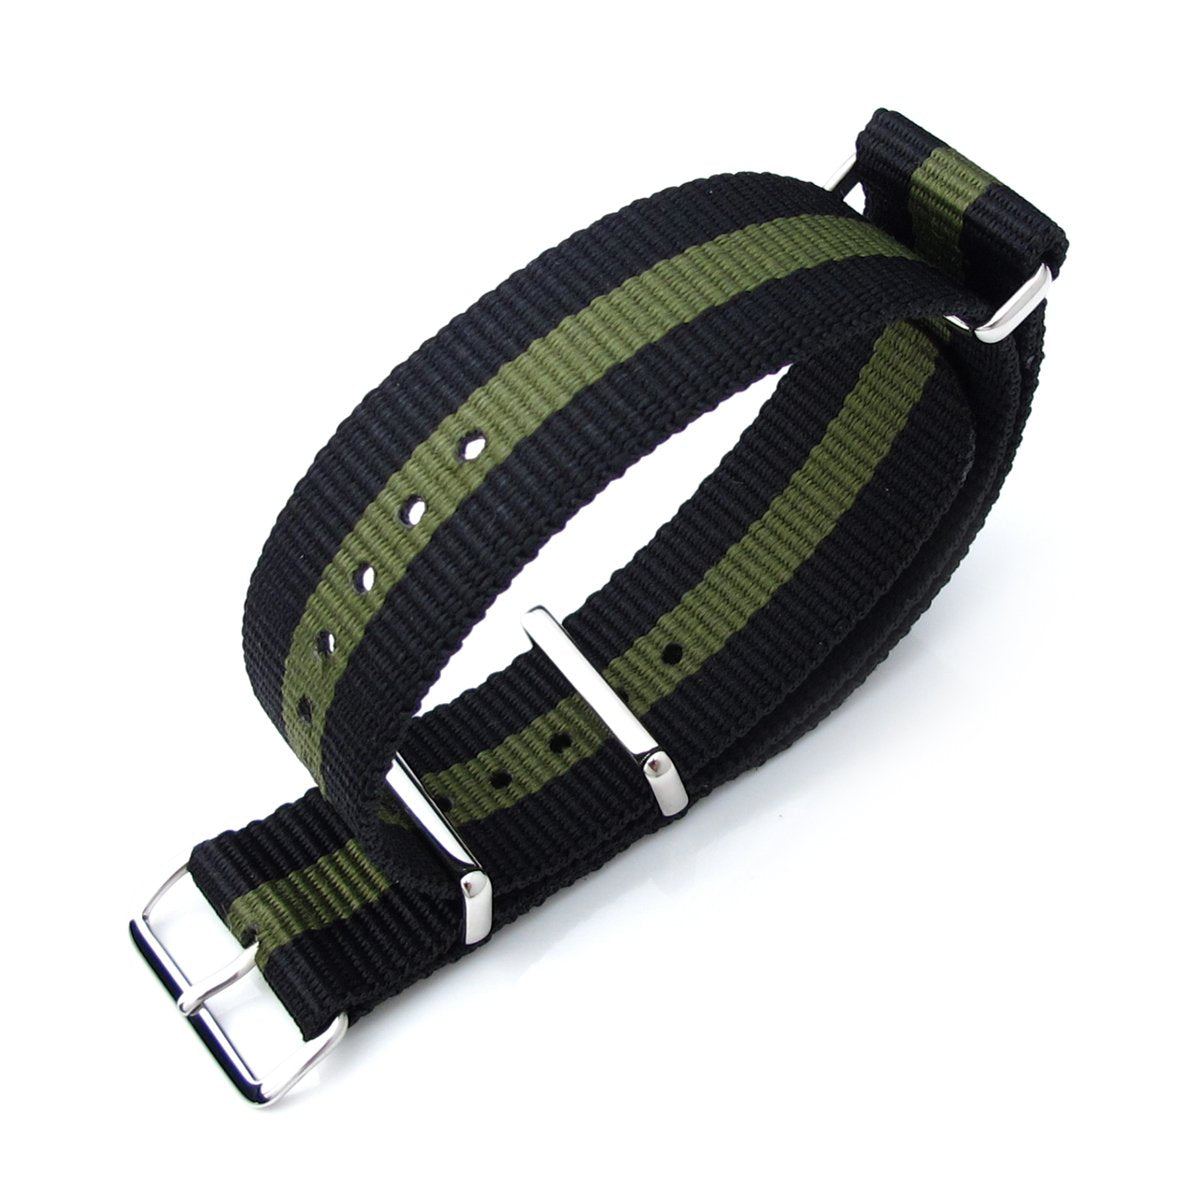 MiLTAT 20mm 21mm or 22mm G10 NATO Military Watch Strap Ballistic Nylon Armband Polished Black & Military Green Strapcode Watch Bands